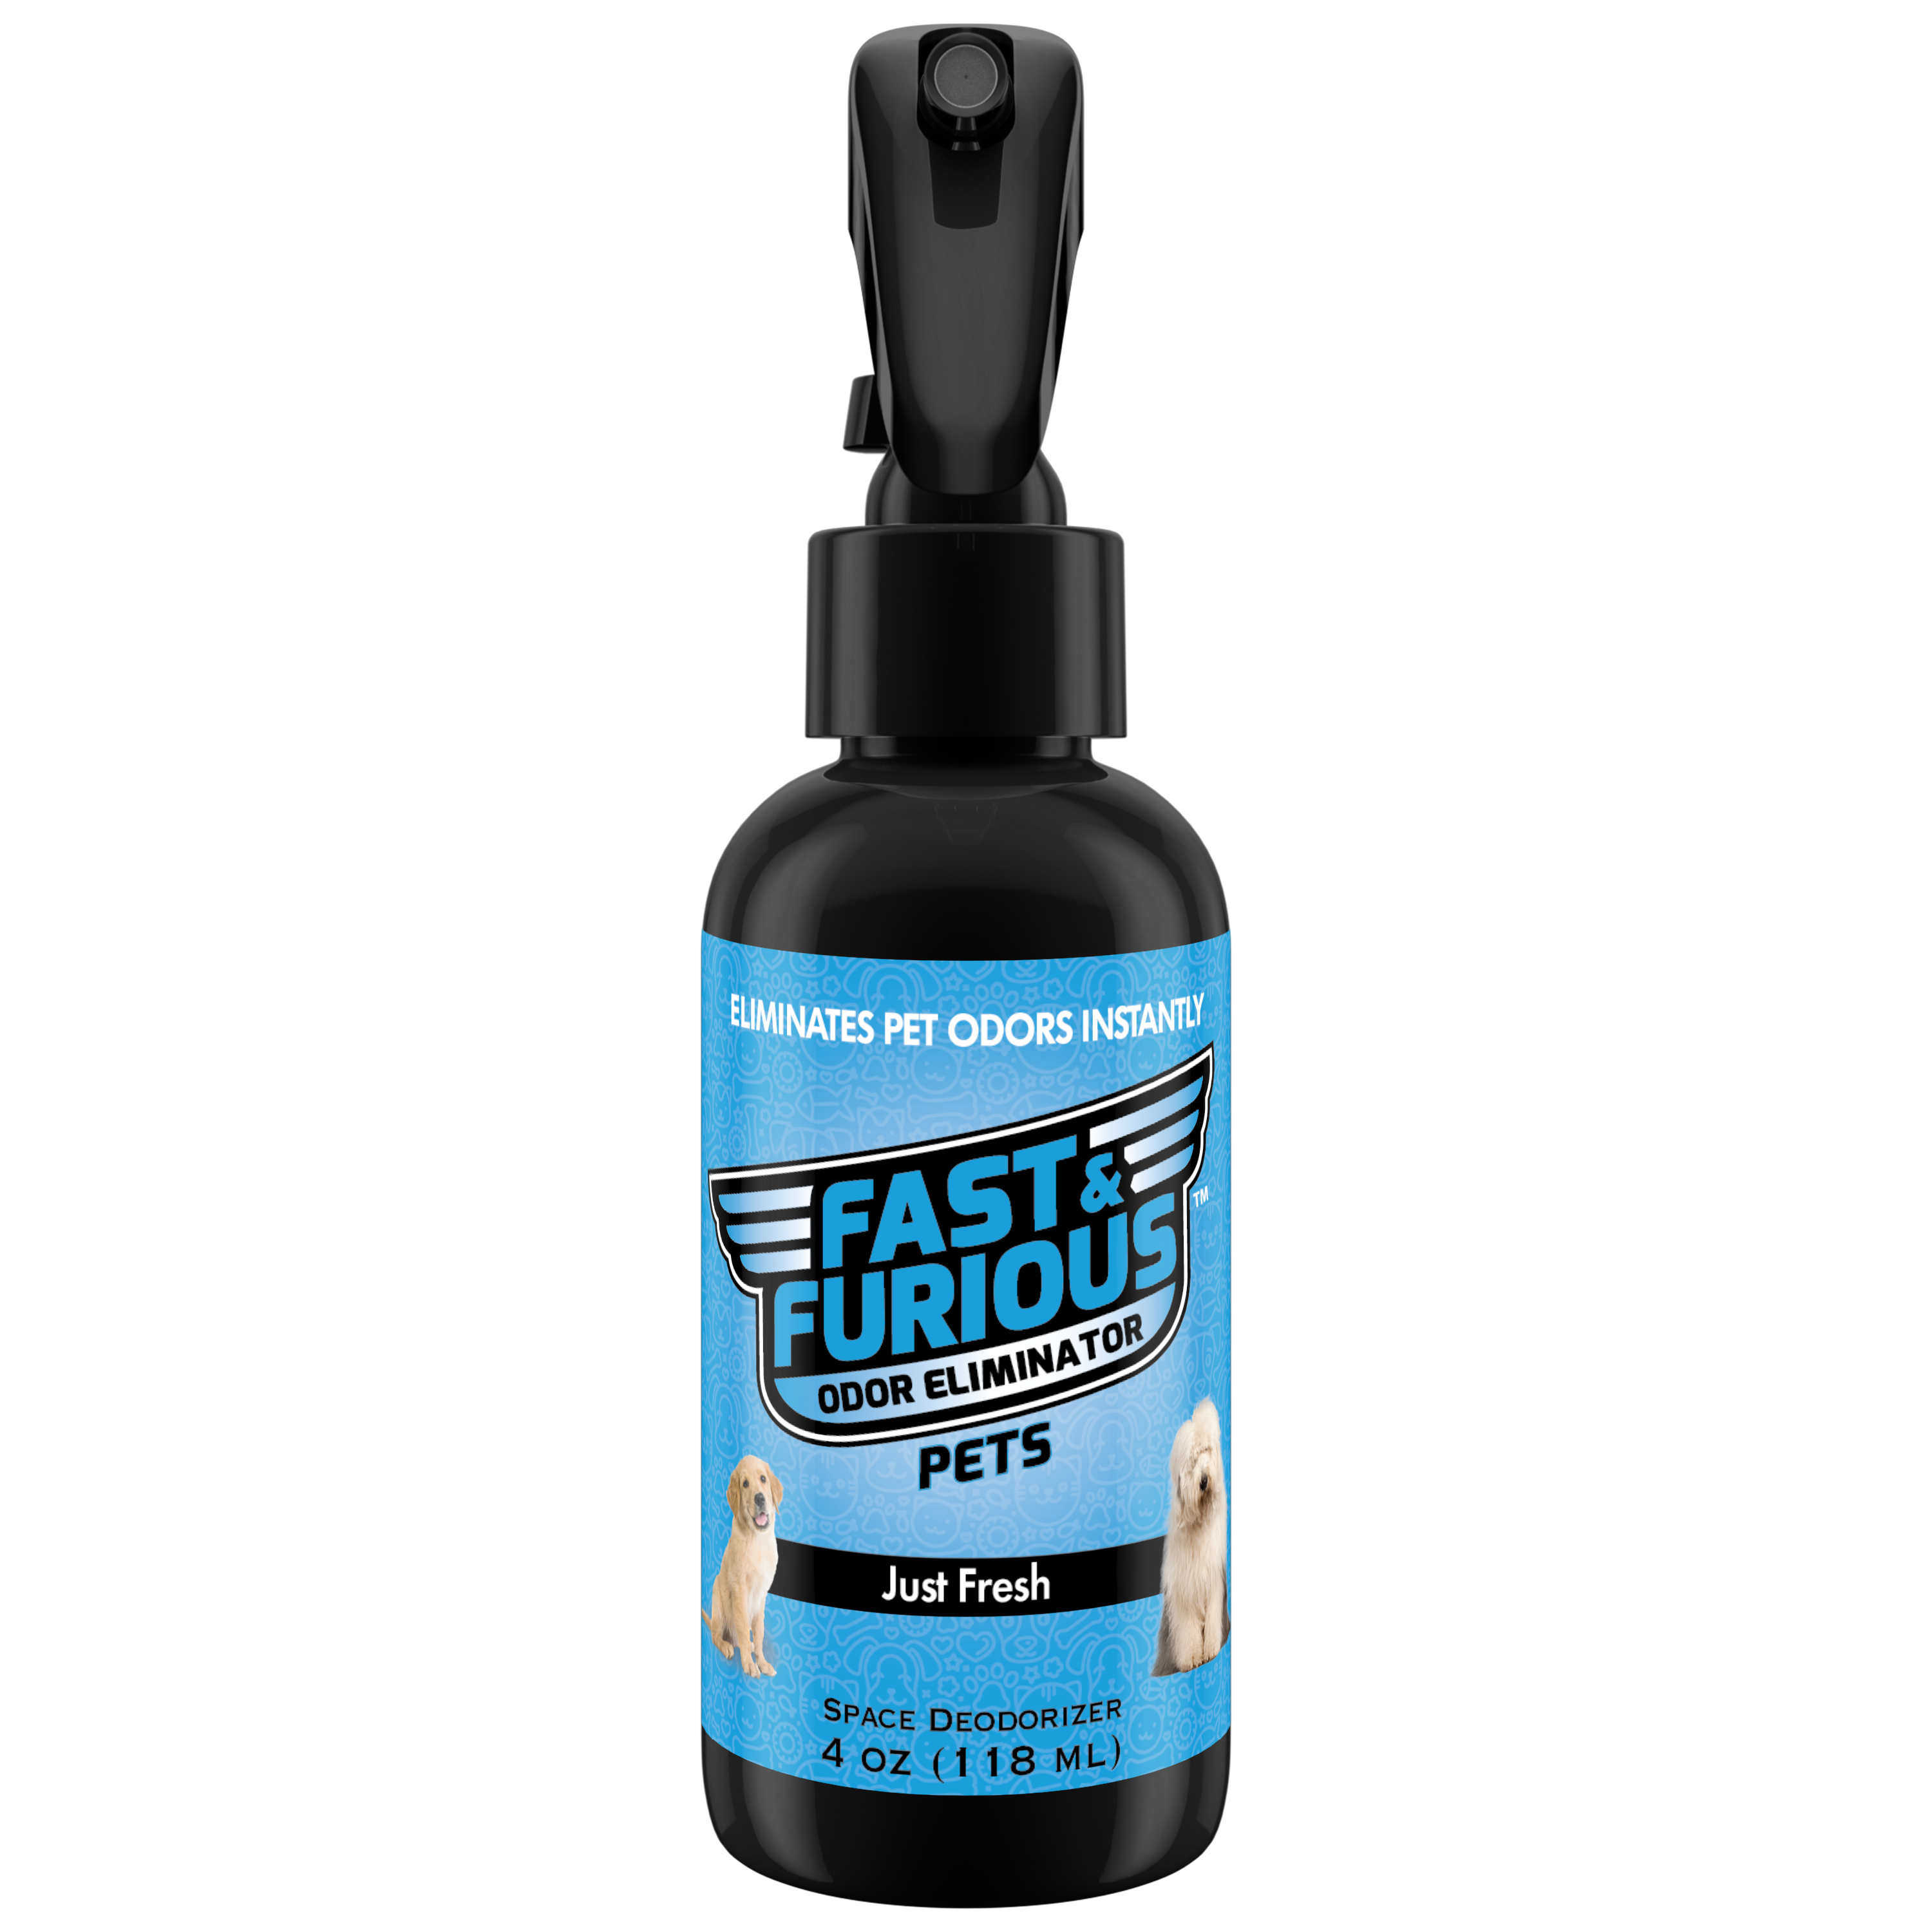 Fast and Furious Pets Odor Eliminator - Just Fresh Scent